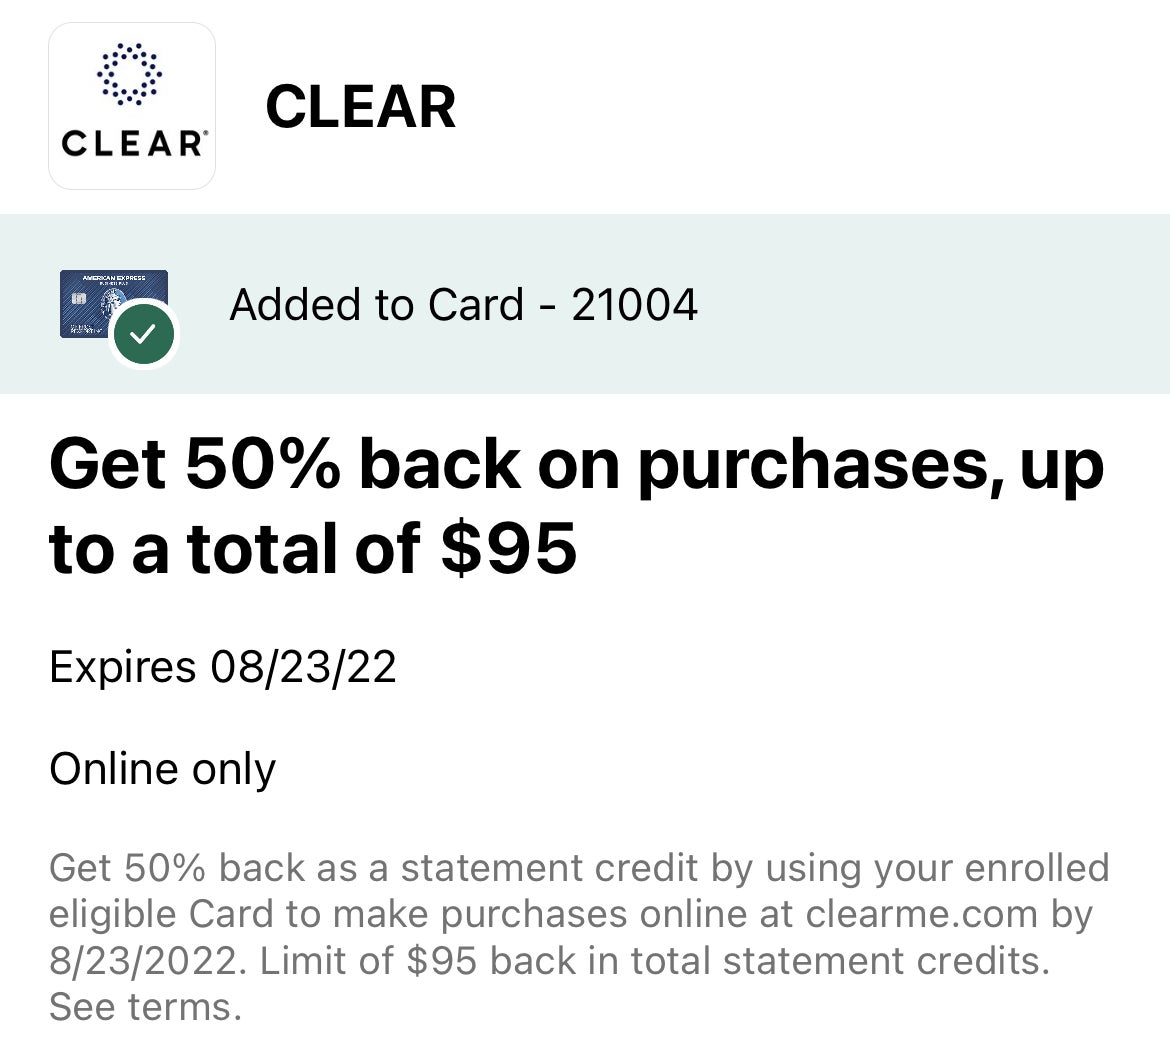 American Express CLEAR Offer